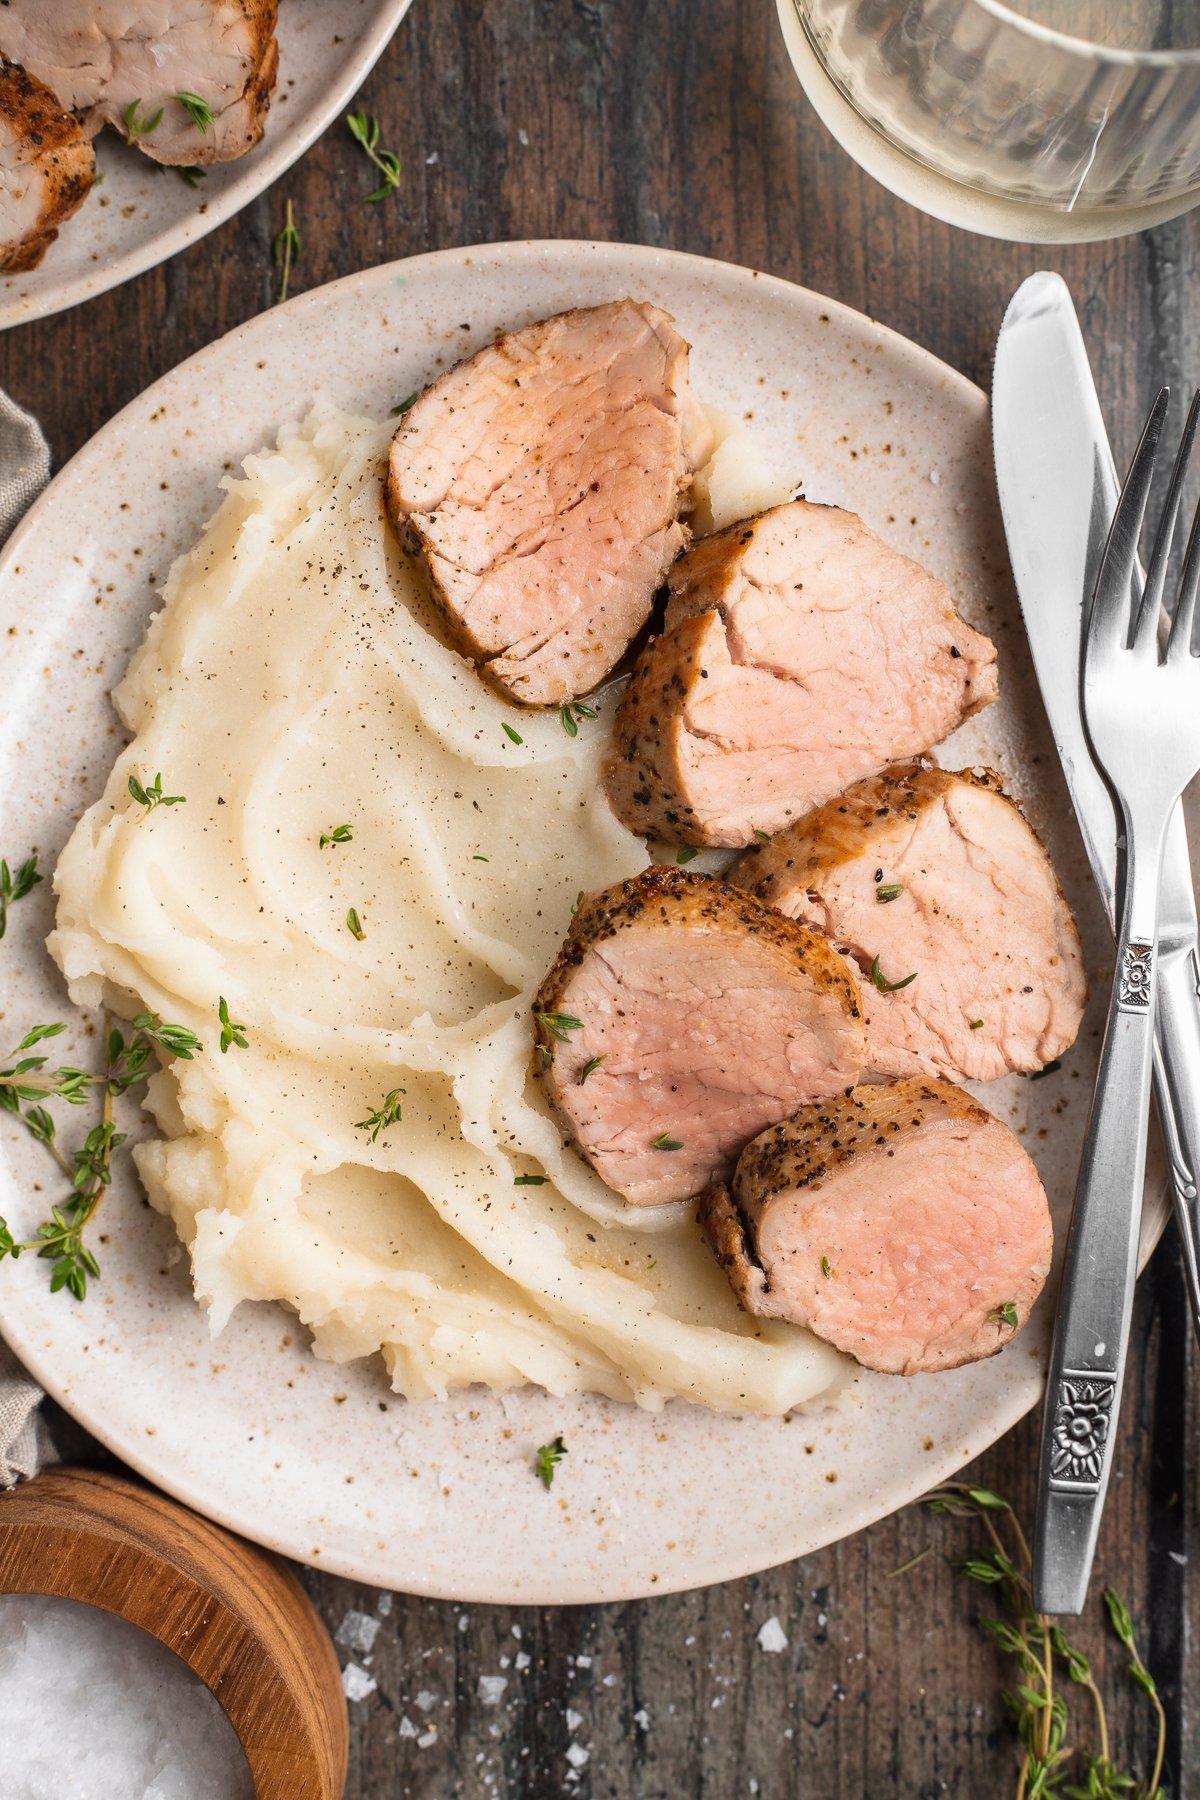 Overhead view of sous vide pork tenderloin sliced and plated with fluffy mashed potatoes on a wooden table.